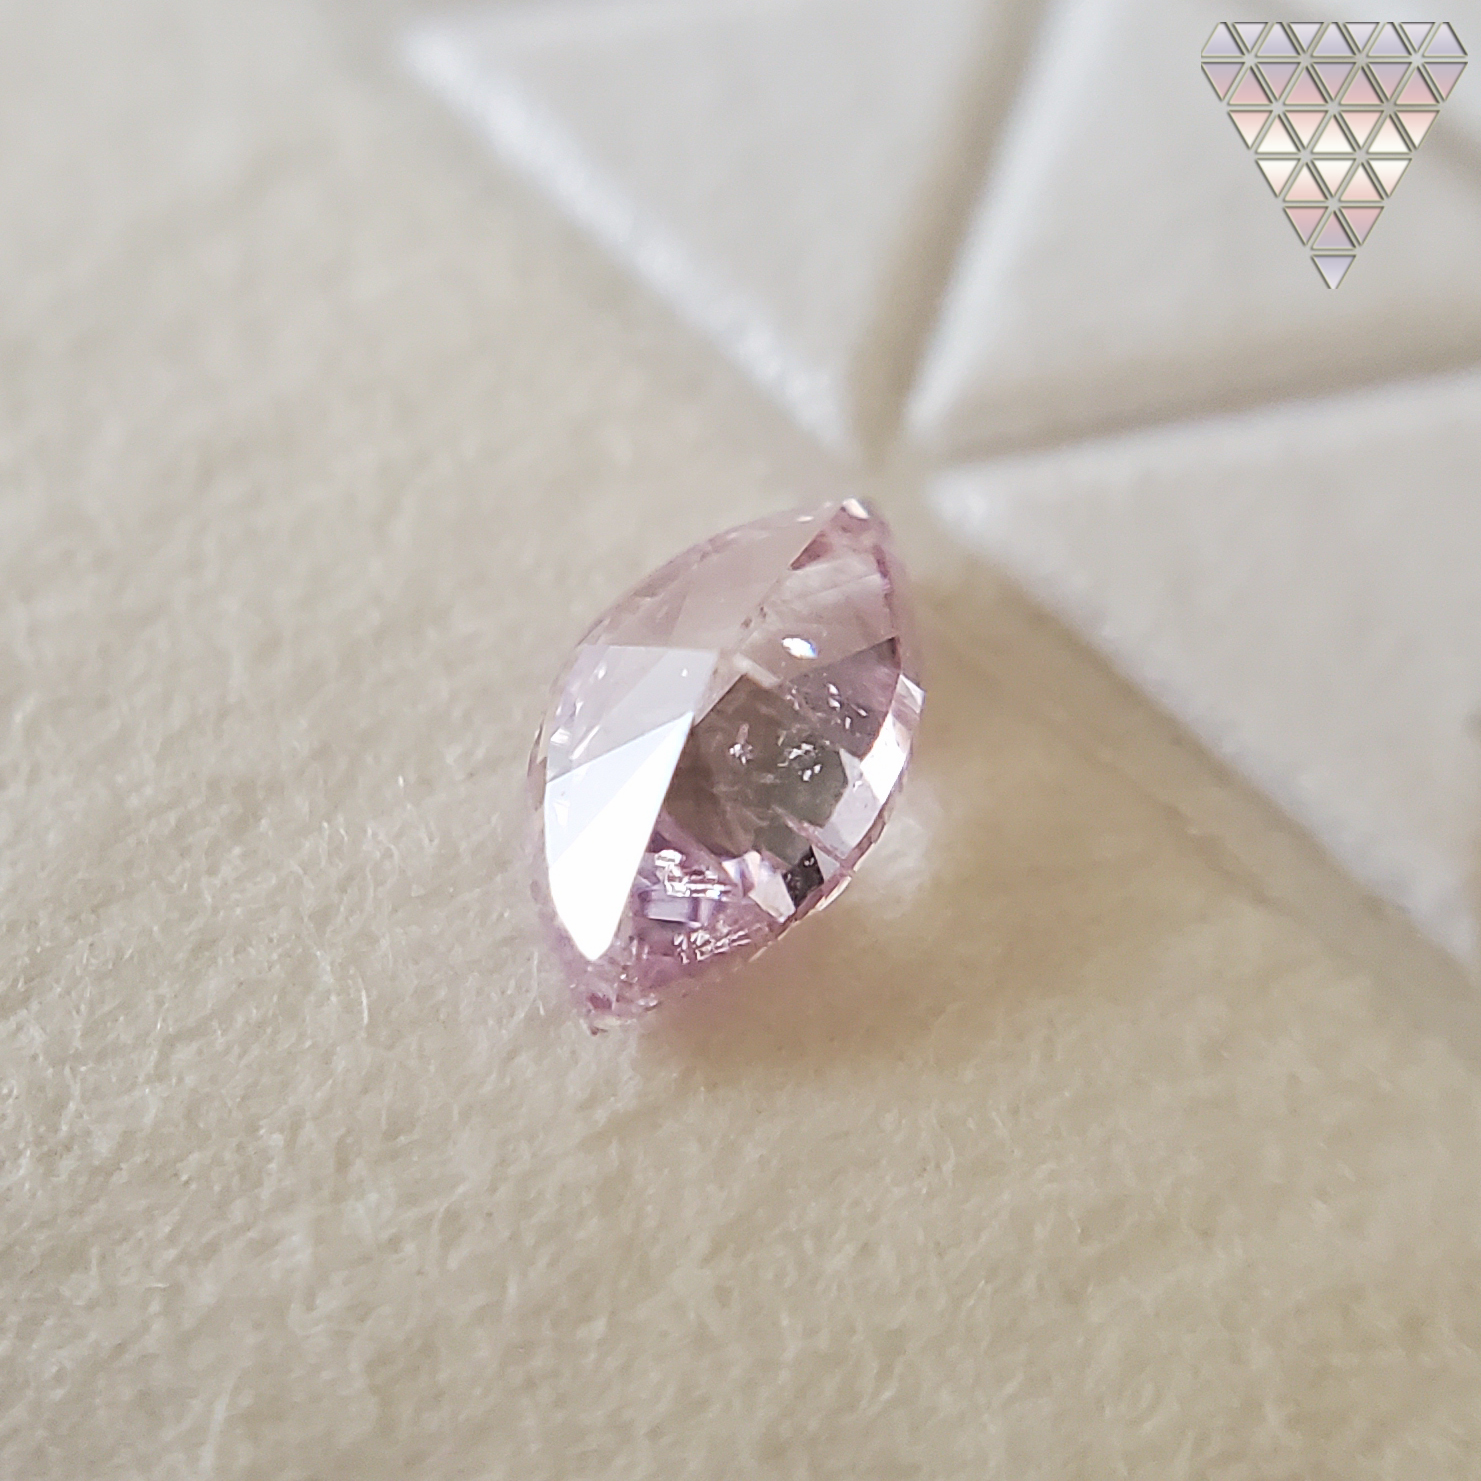 0.114 Ct Fancy Purple Pink I2 Marquise AGT Japan Natural Loose Diamond Exchange Federation 5